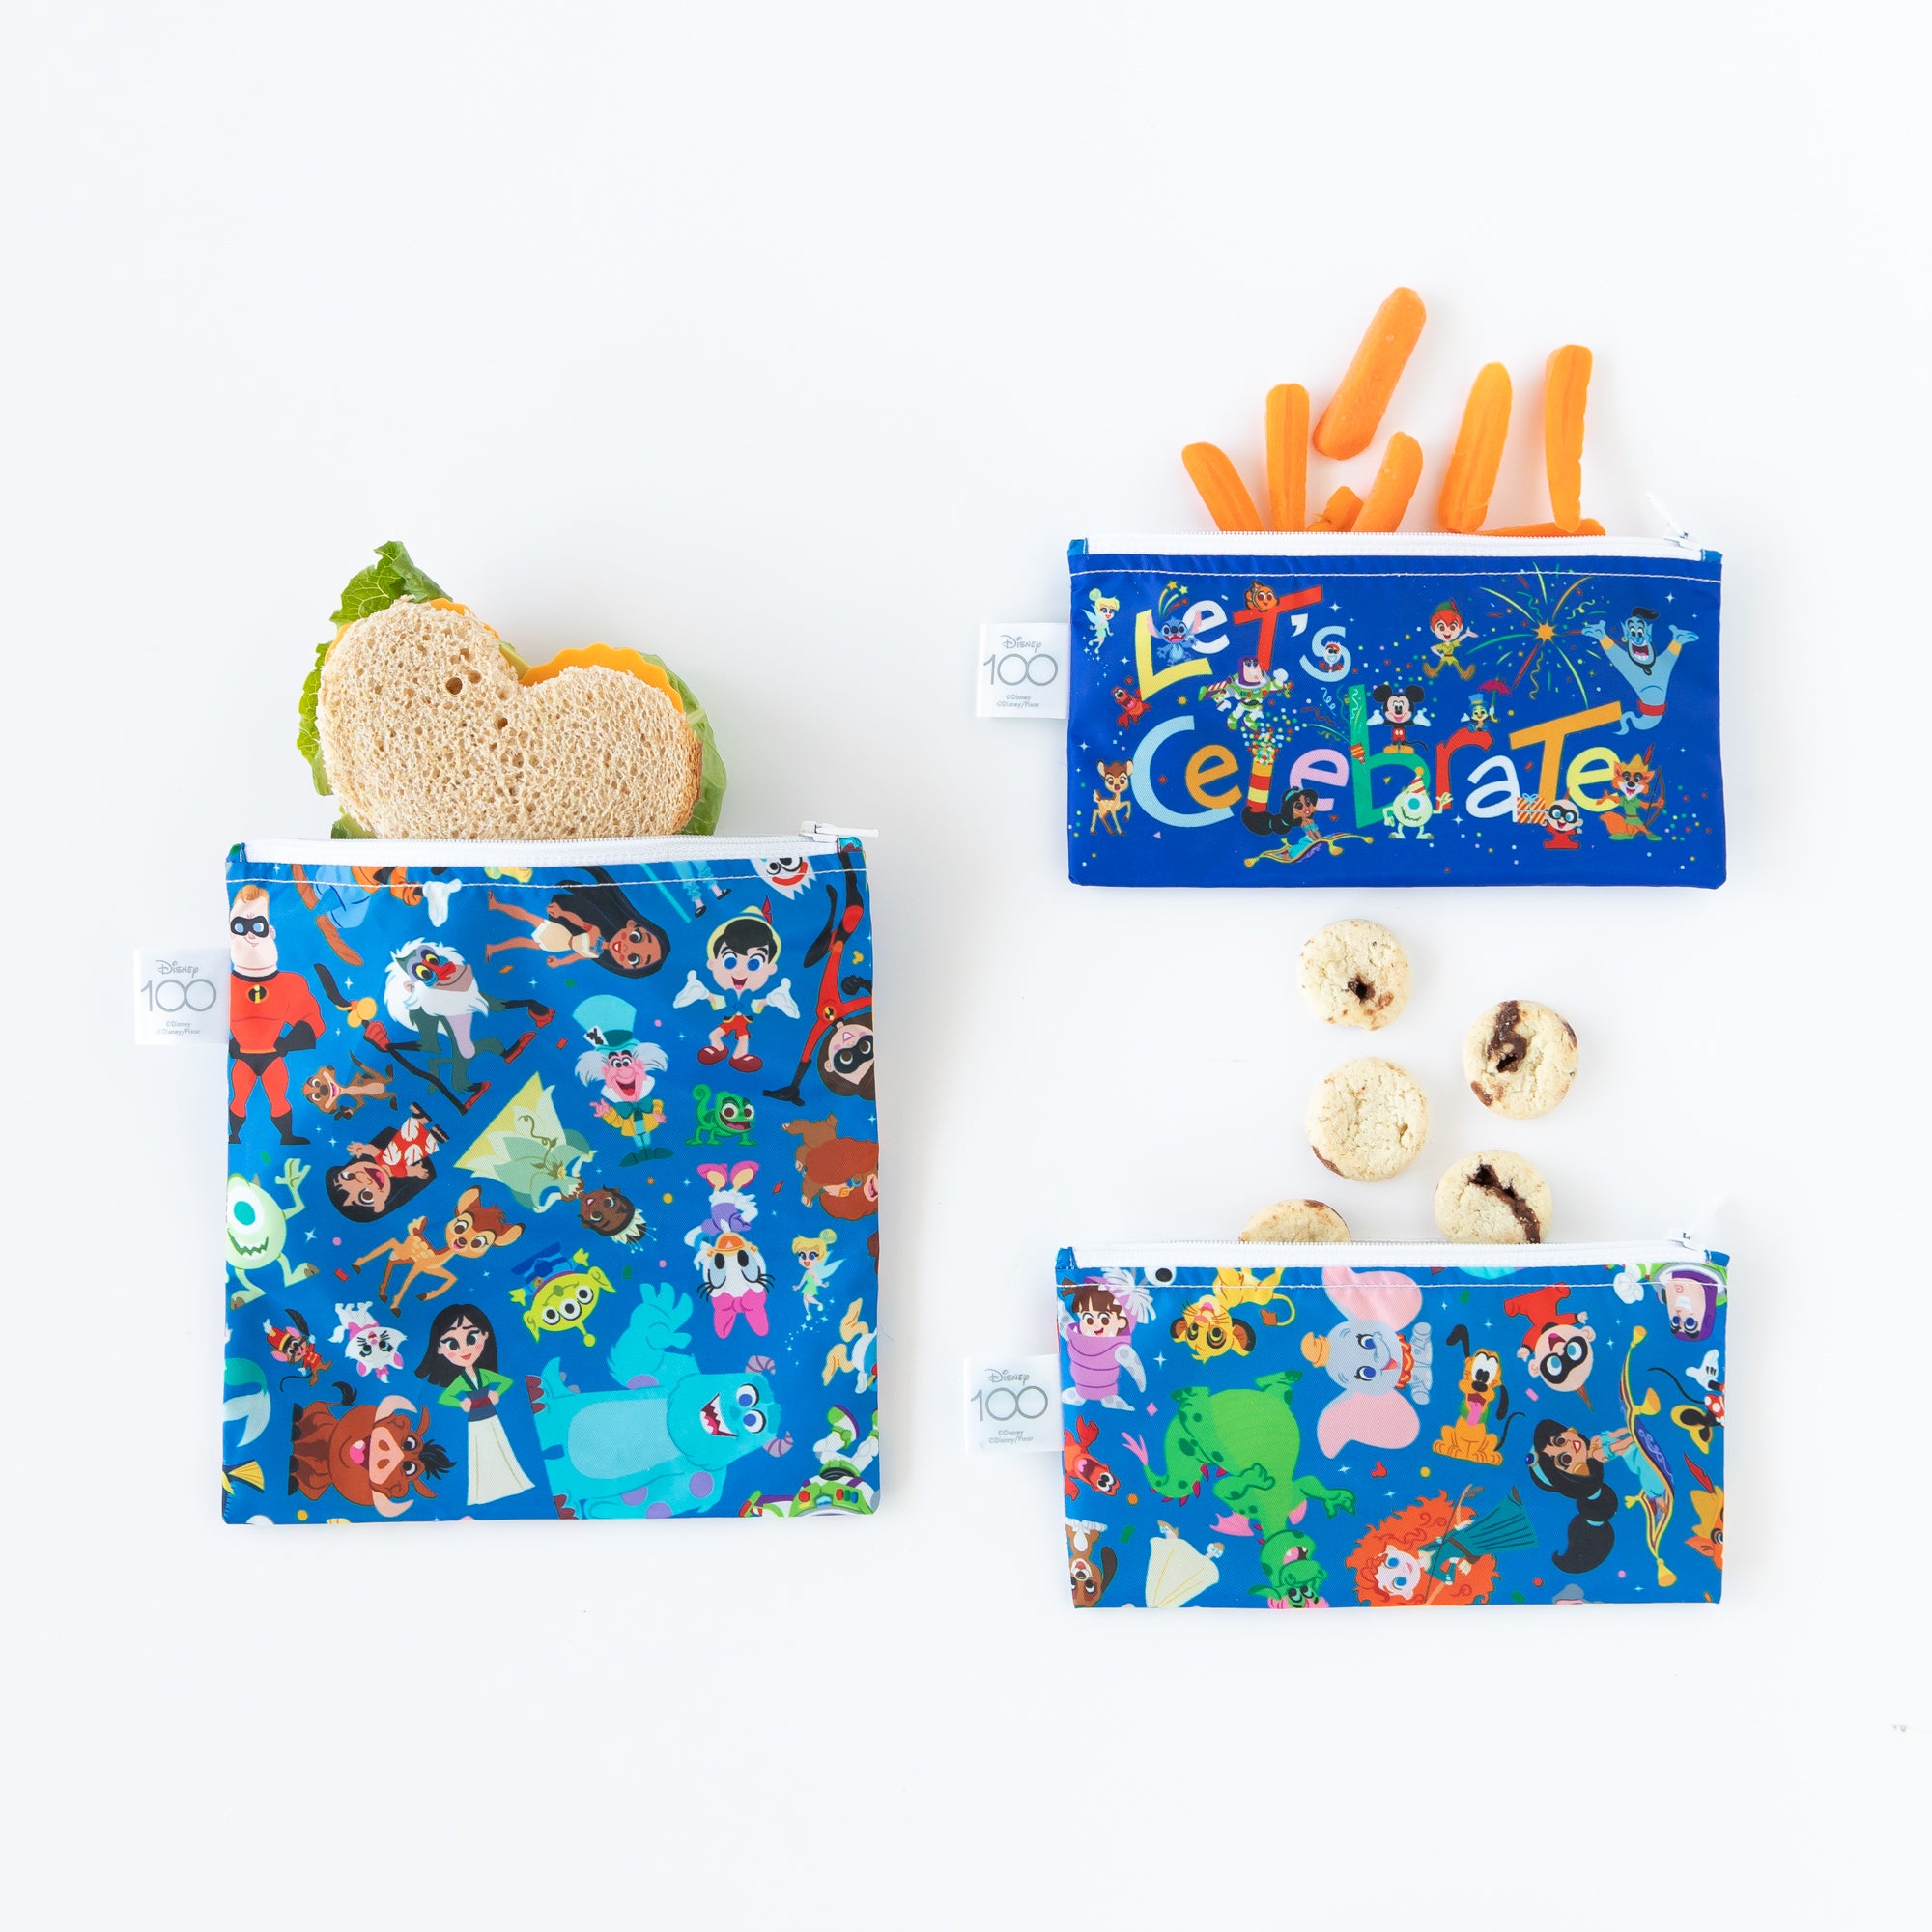 Snack time 💃🍓 Reusable Snack Bags are - Thirty-One Gifts